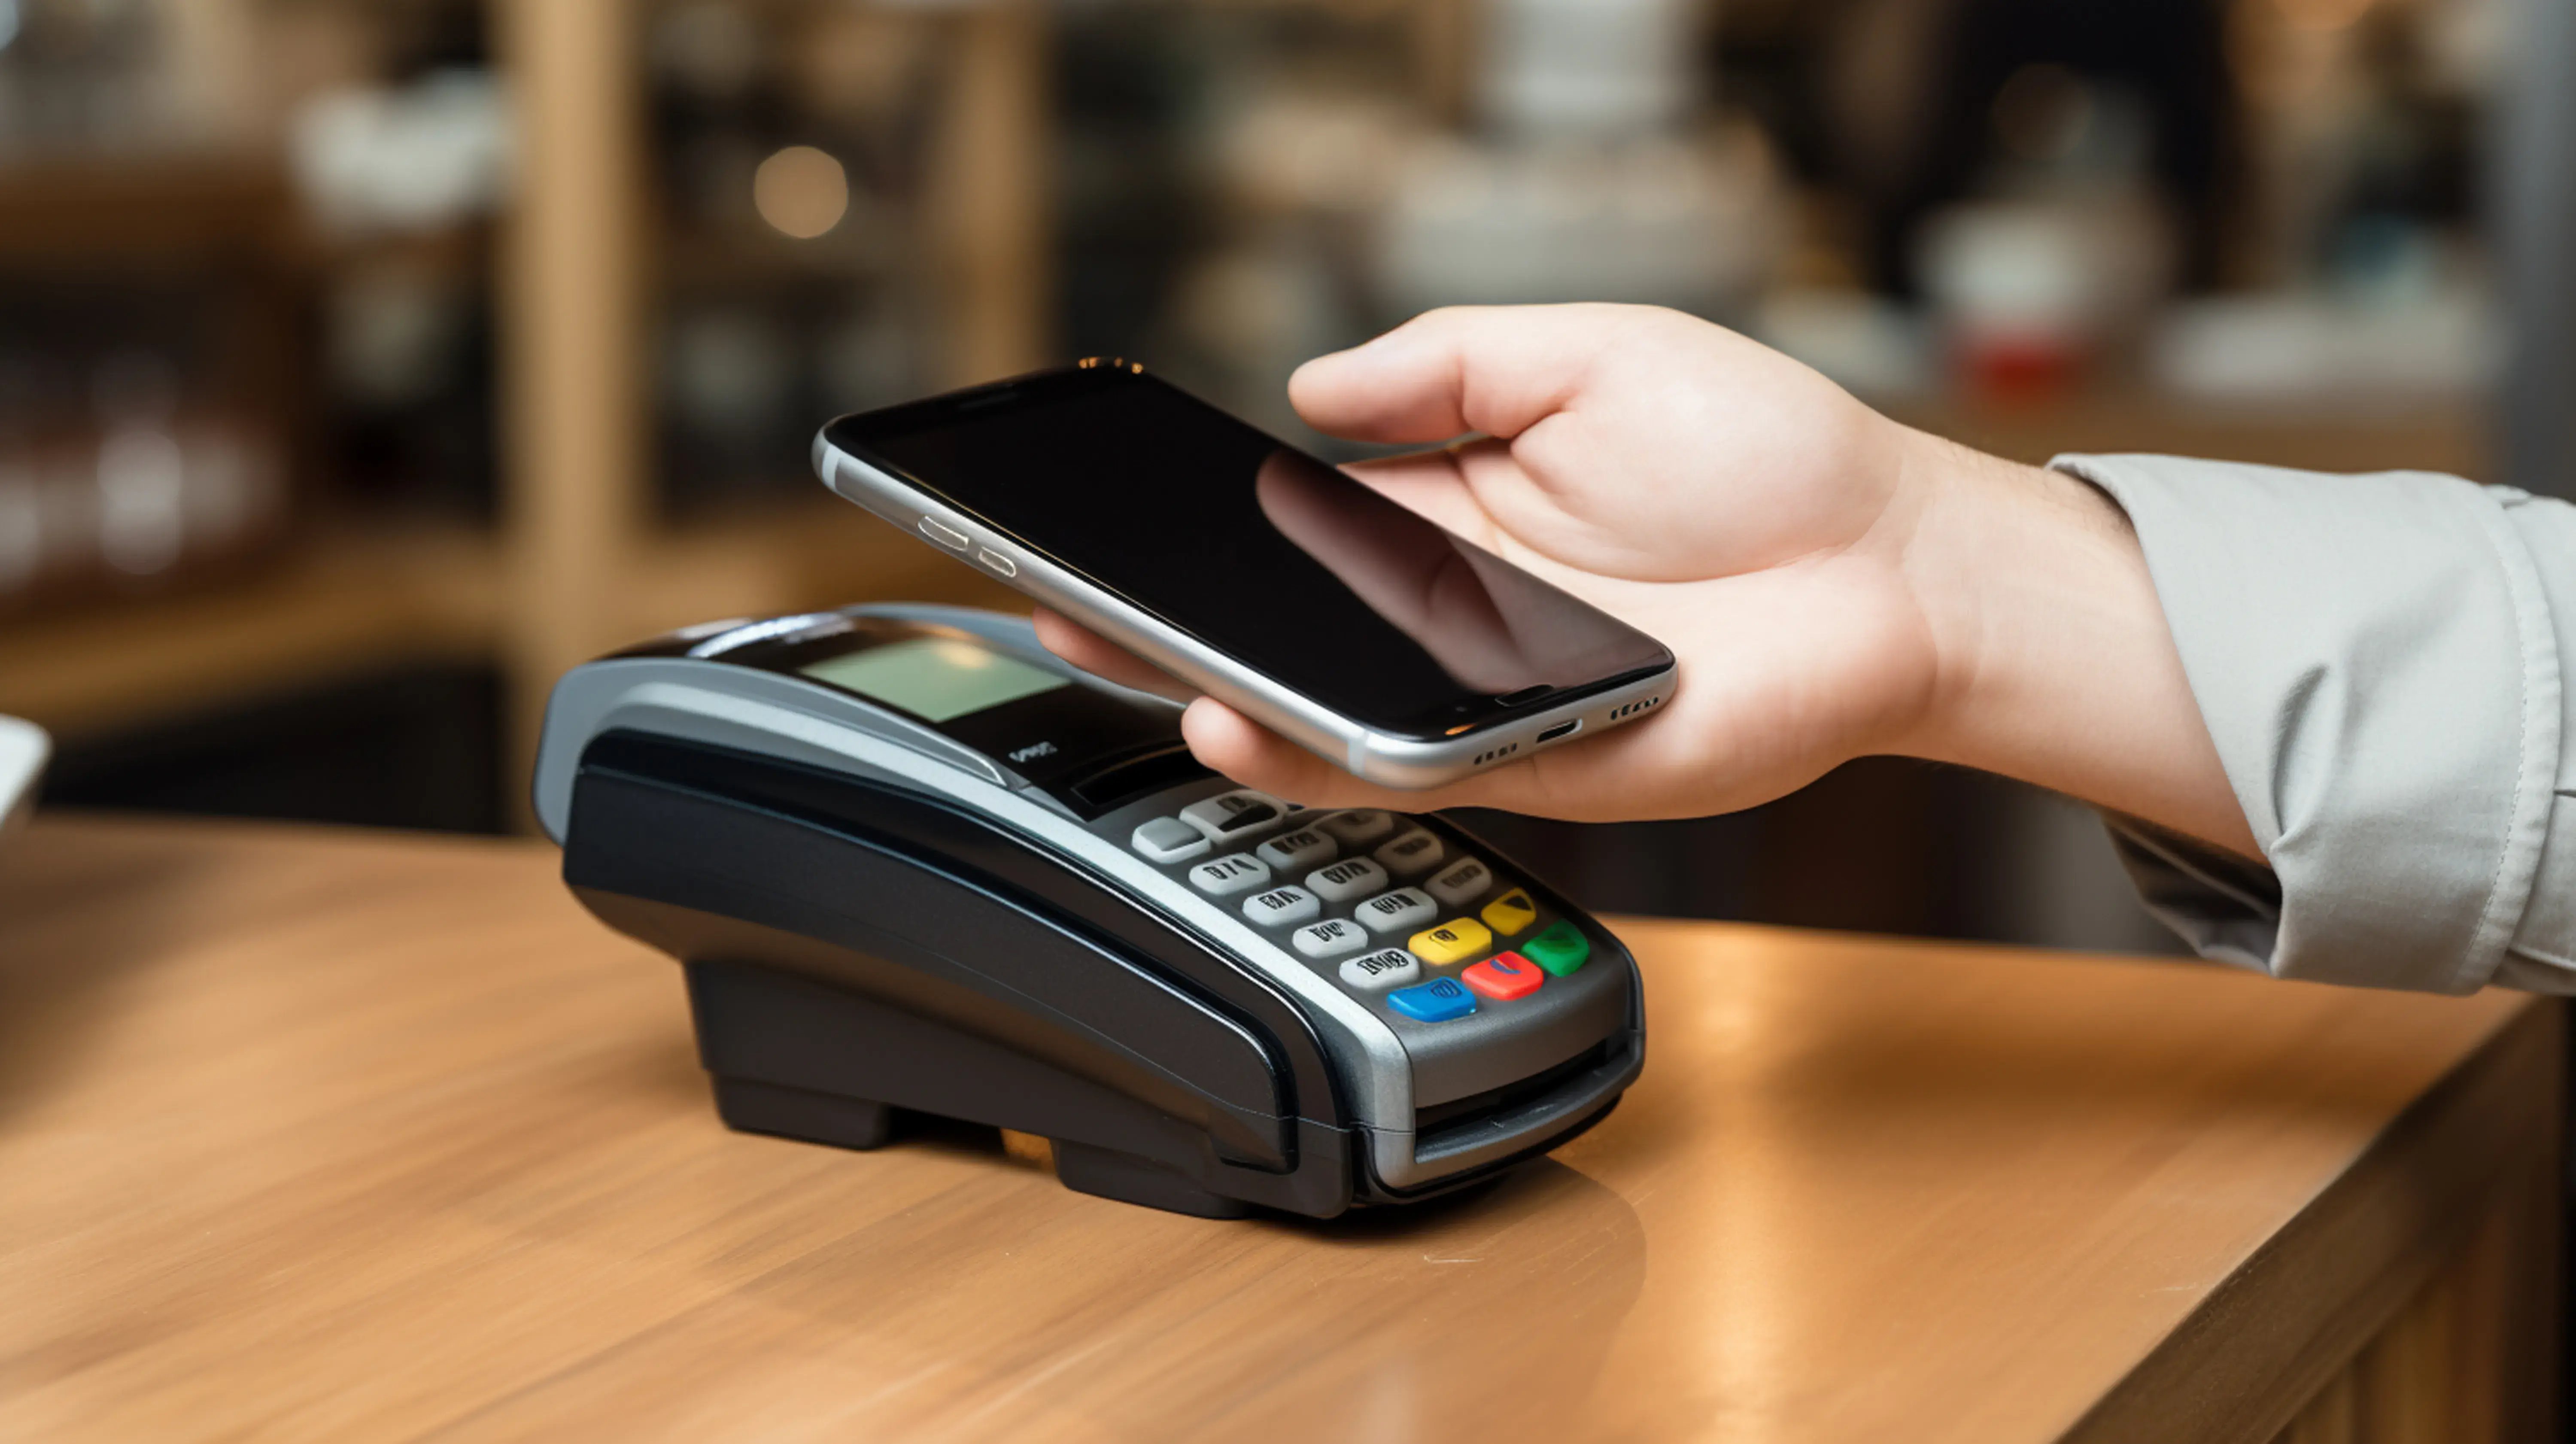 payment-terminal-with-payment-card-coffee-machine-credit-card-paying-nfc-payment-restaurant-cafe